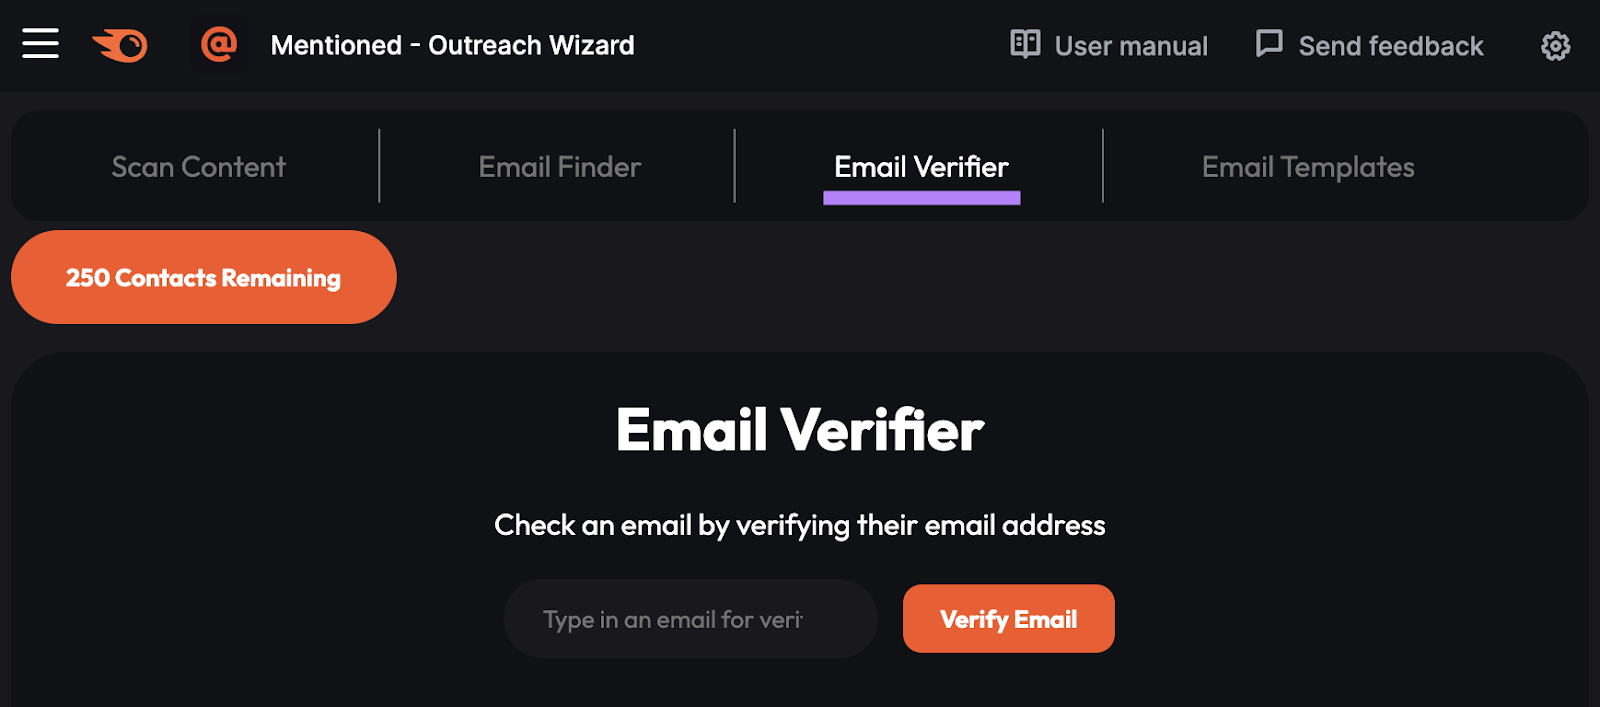 "Email Verifier" tab in Mentioned - Outreach Wizard app